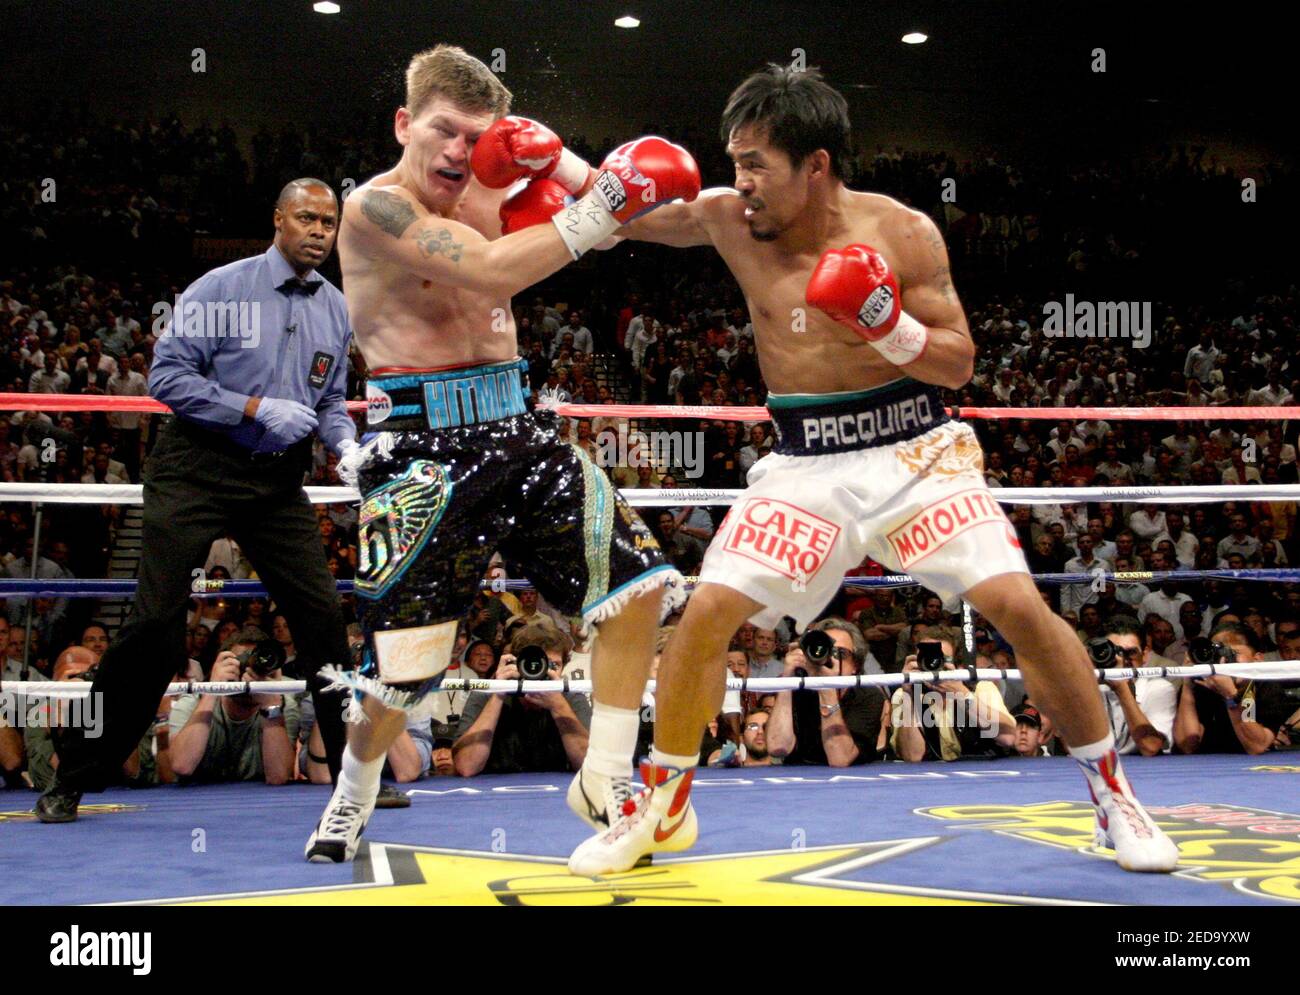 RICKY HATTON & MANNY PACQUIAO BOXING SIGNED AUTOGRAPH PHOTO PRINT 